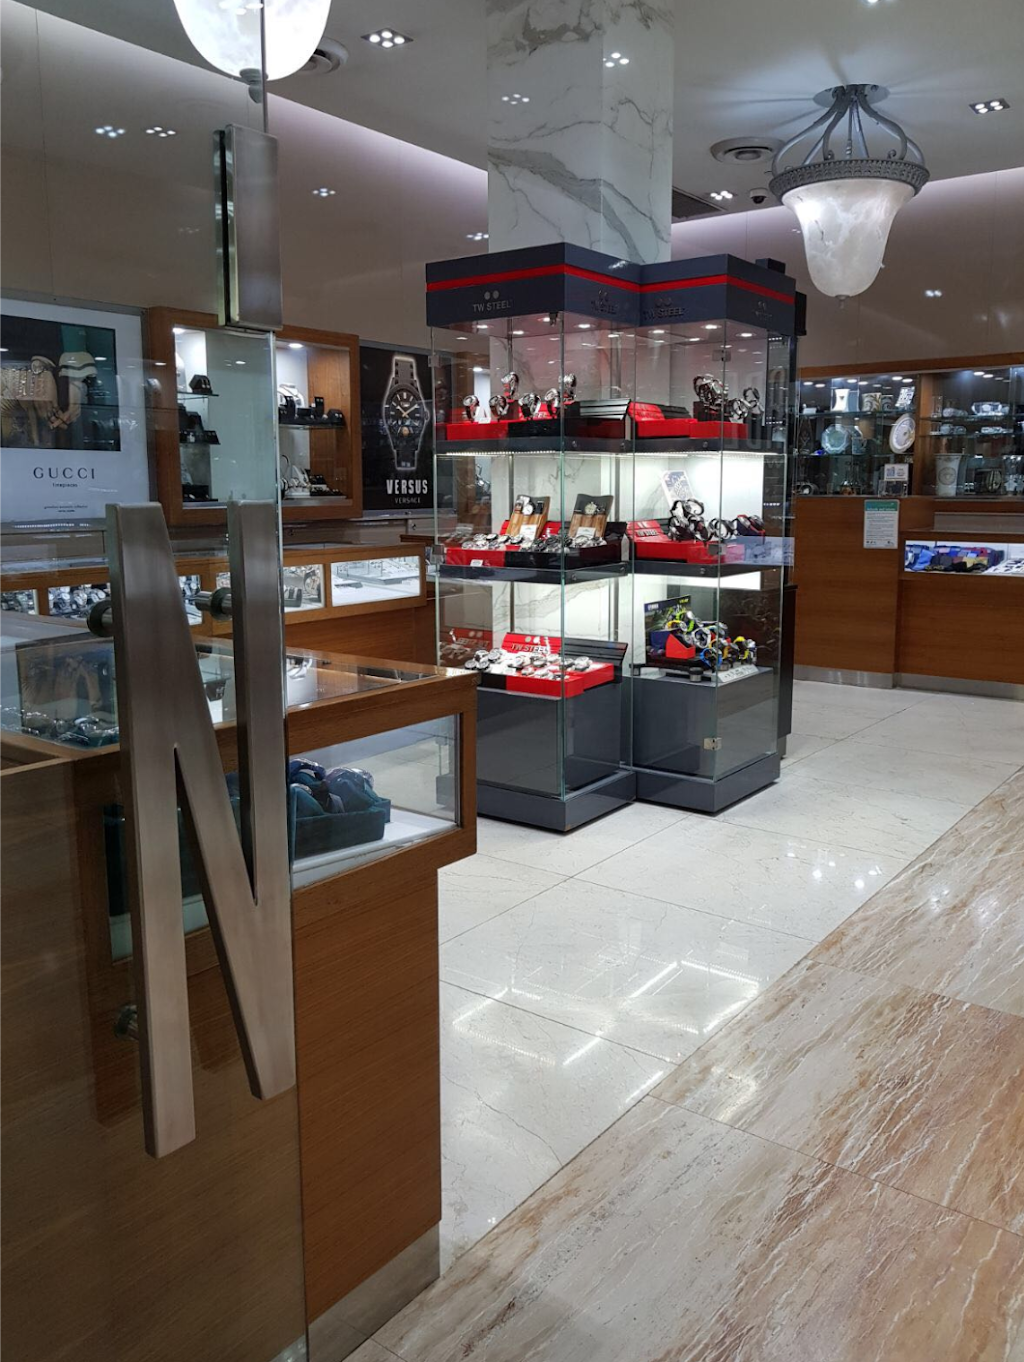 Nader Jewellers | SP 203 Level 2 North Terrace, Central Bankstown NSW, Bankstown NSW 2200, Australia | Phone: (02) 9708 1086